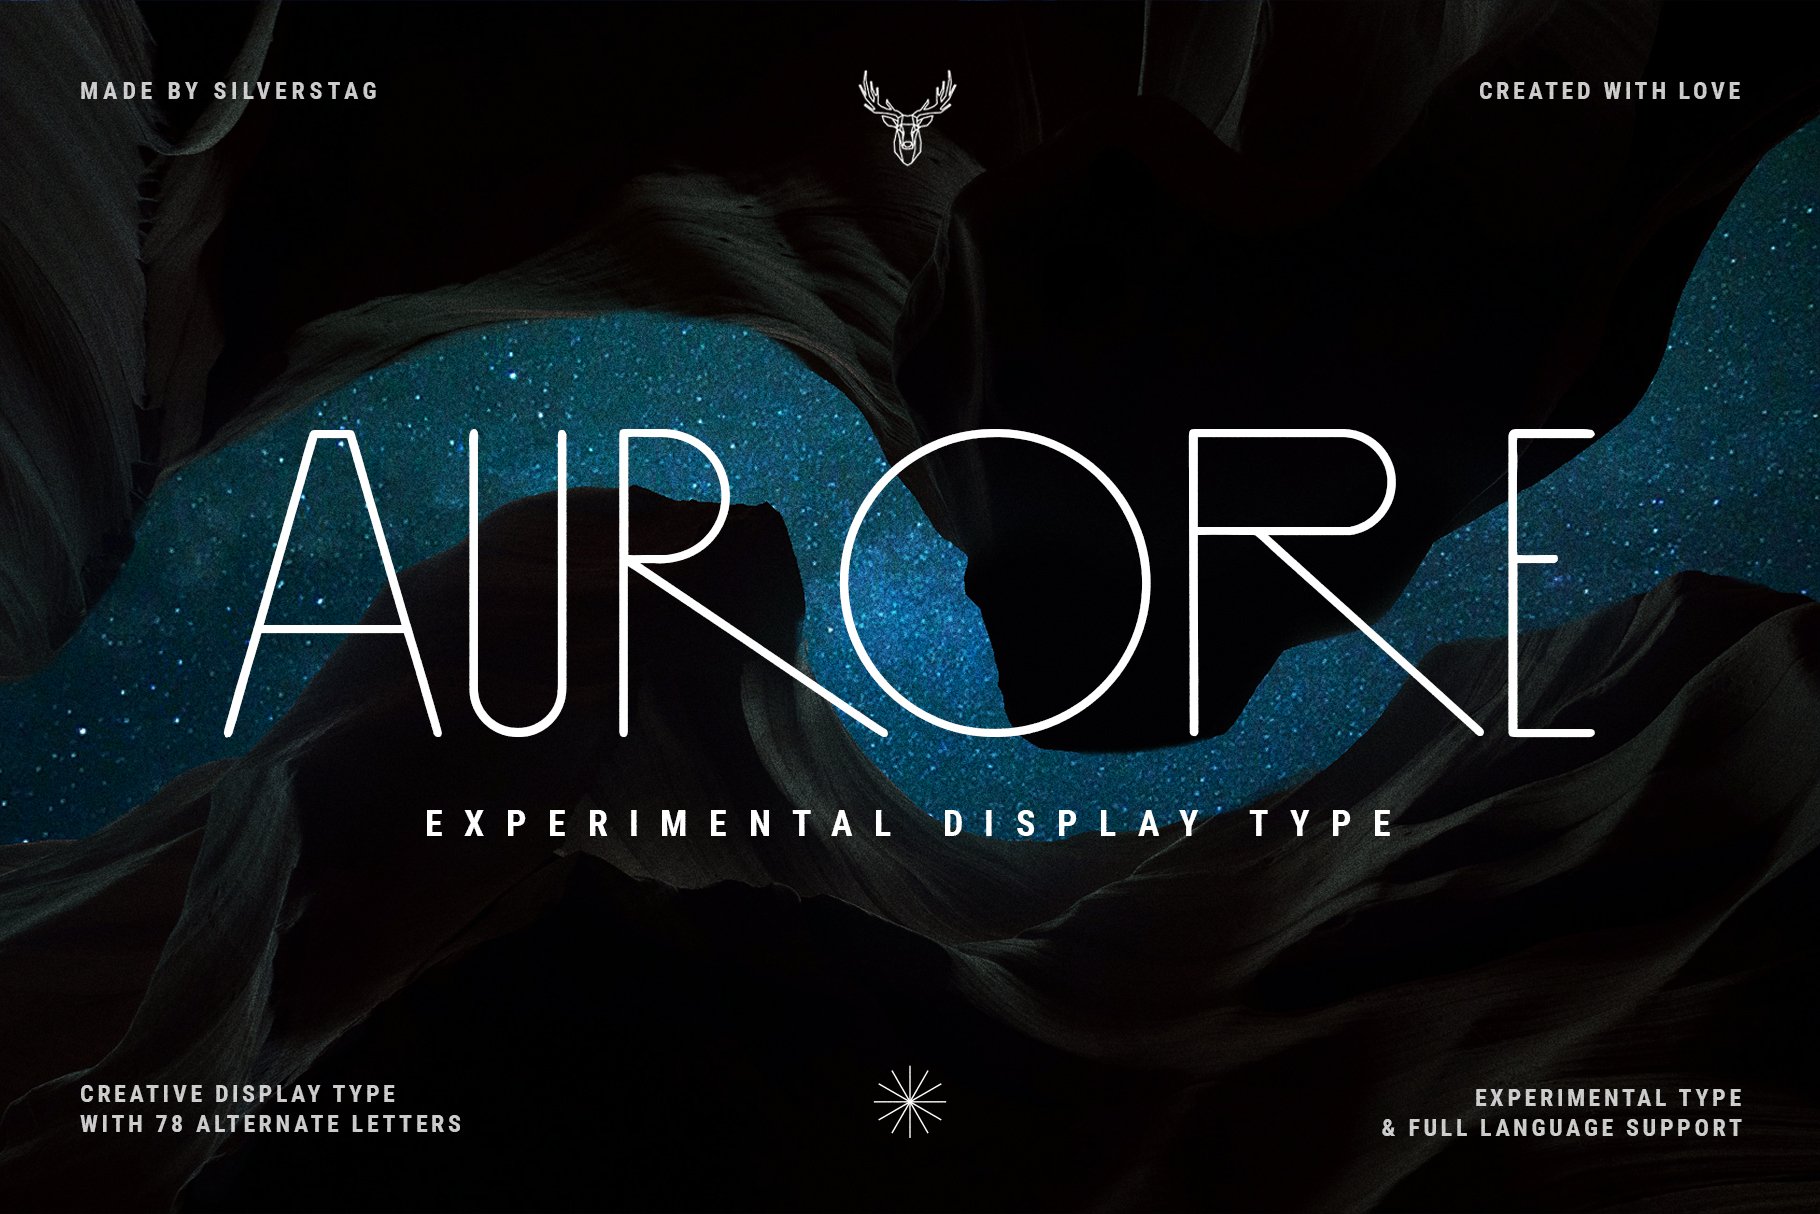 Aurore - Experimental Display Type cover image.